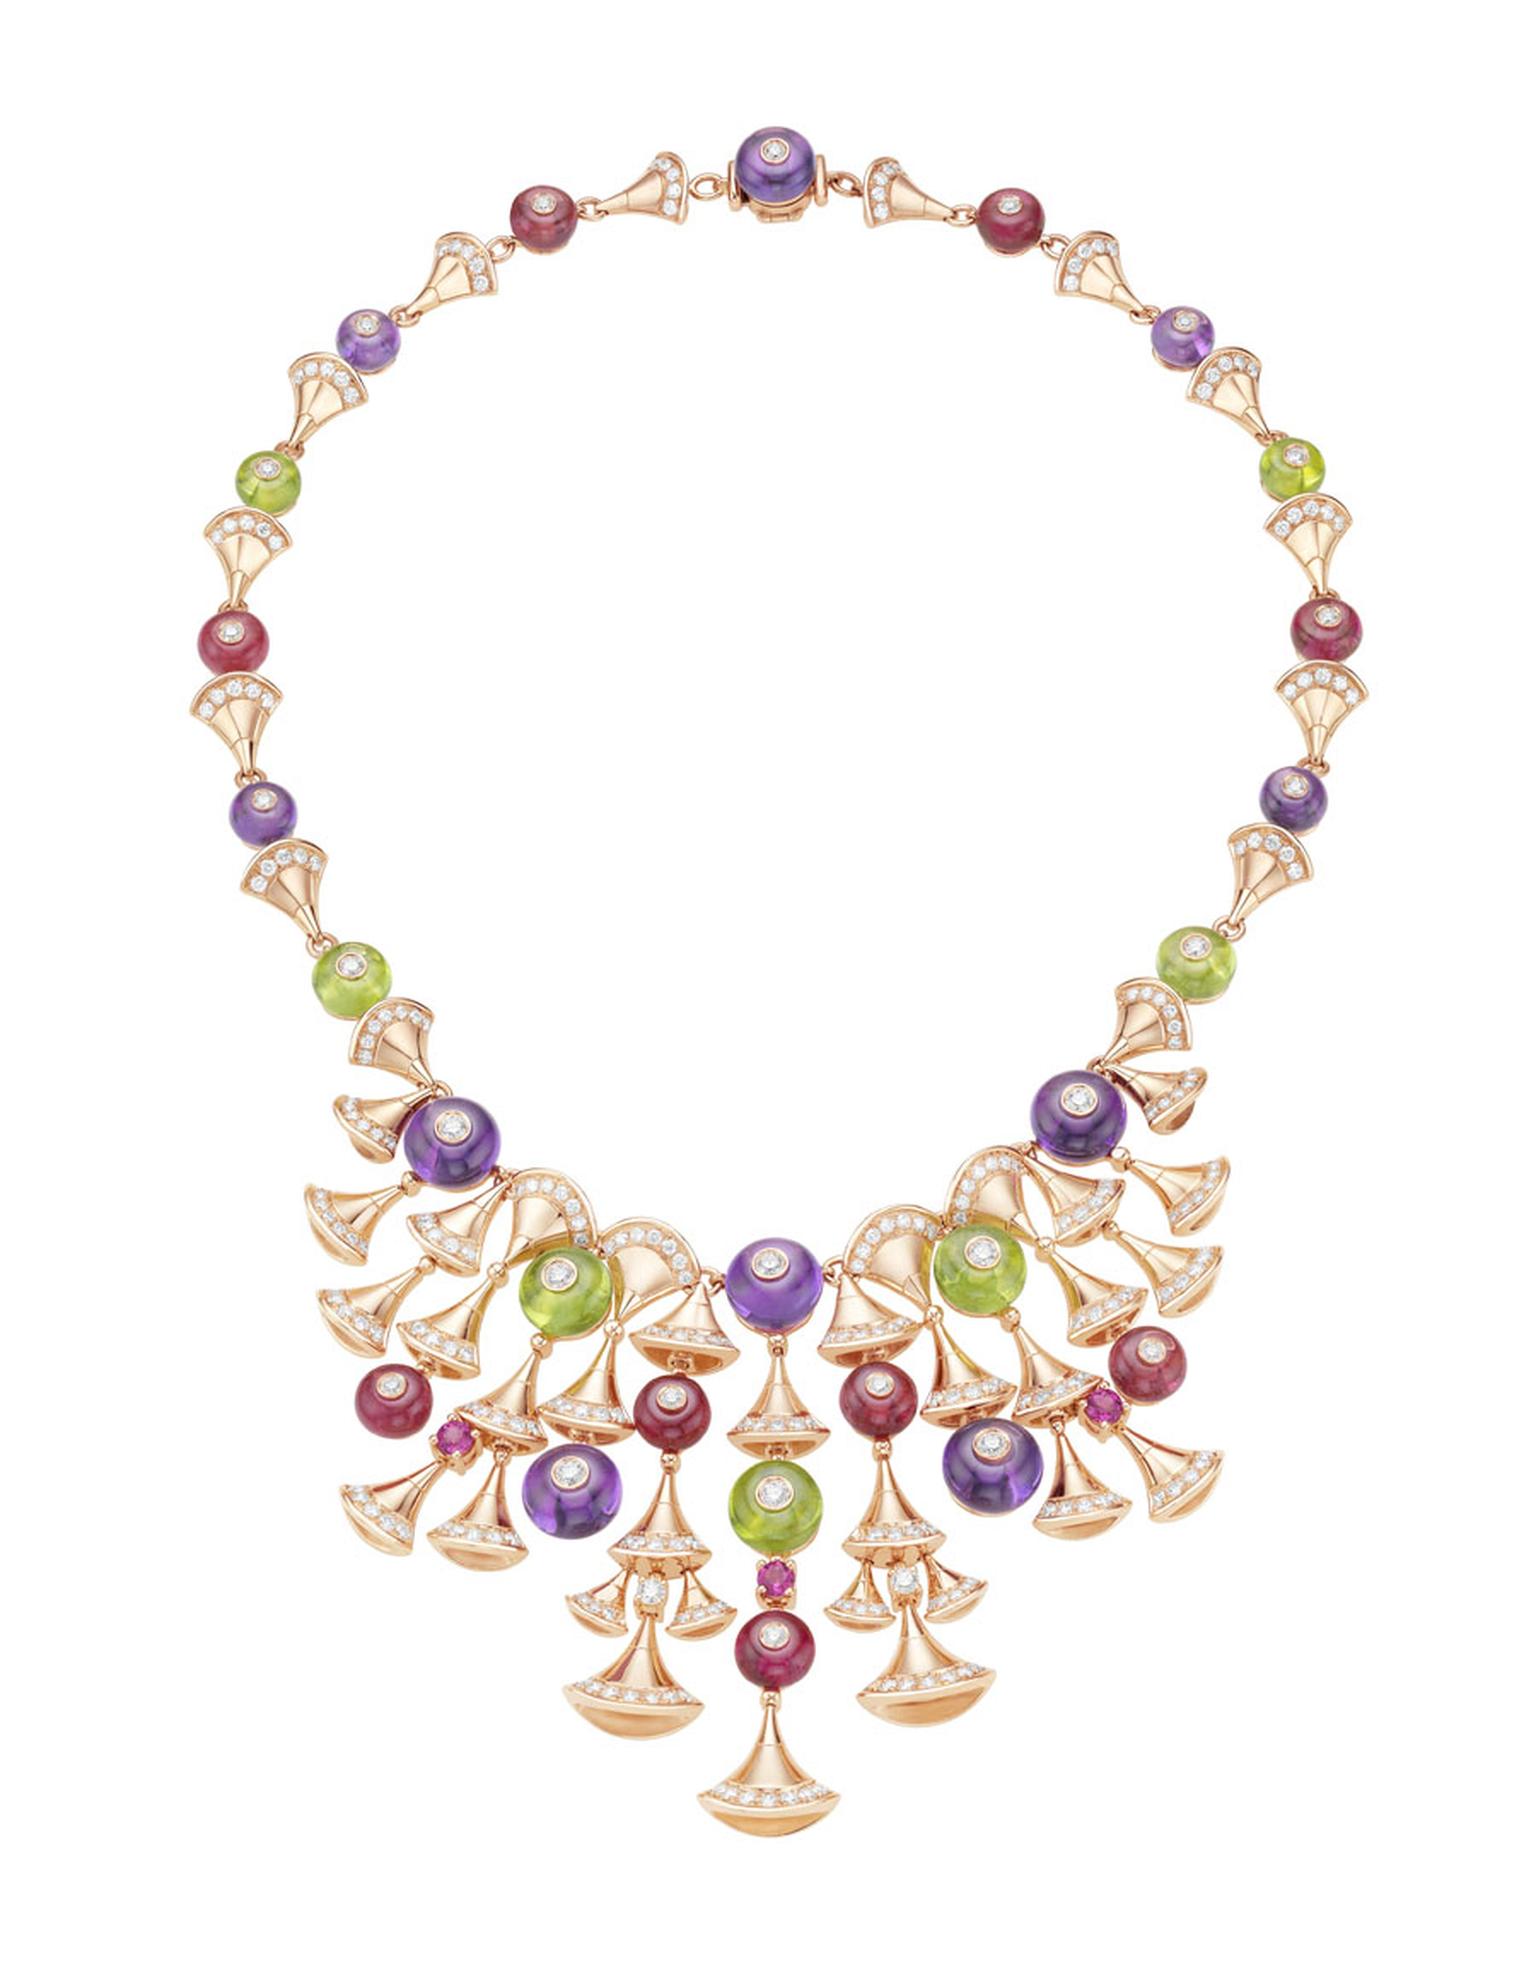 Bulgari reveals Diva high jewellery collection at Paris Haute Couture week  | The Jewellery Editor